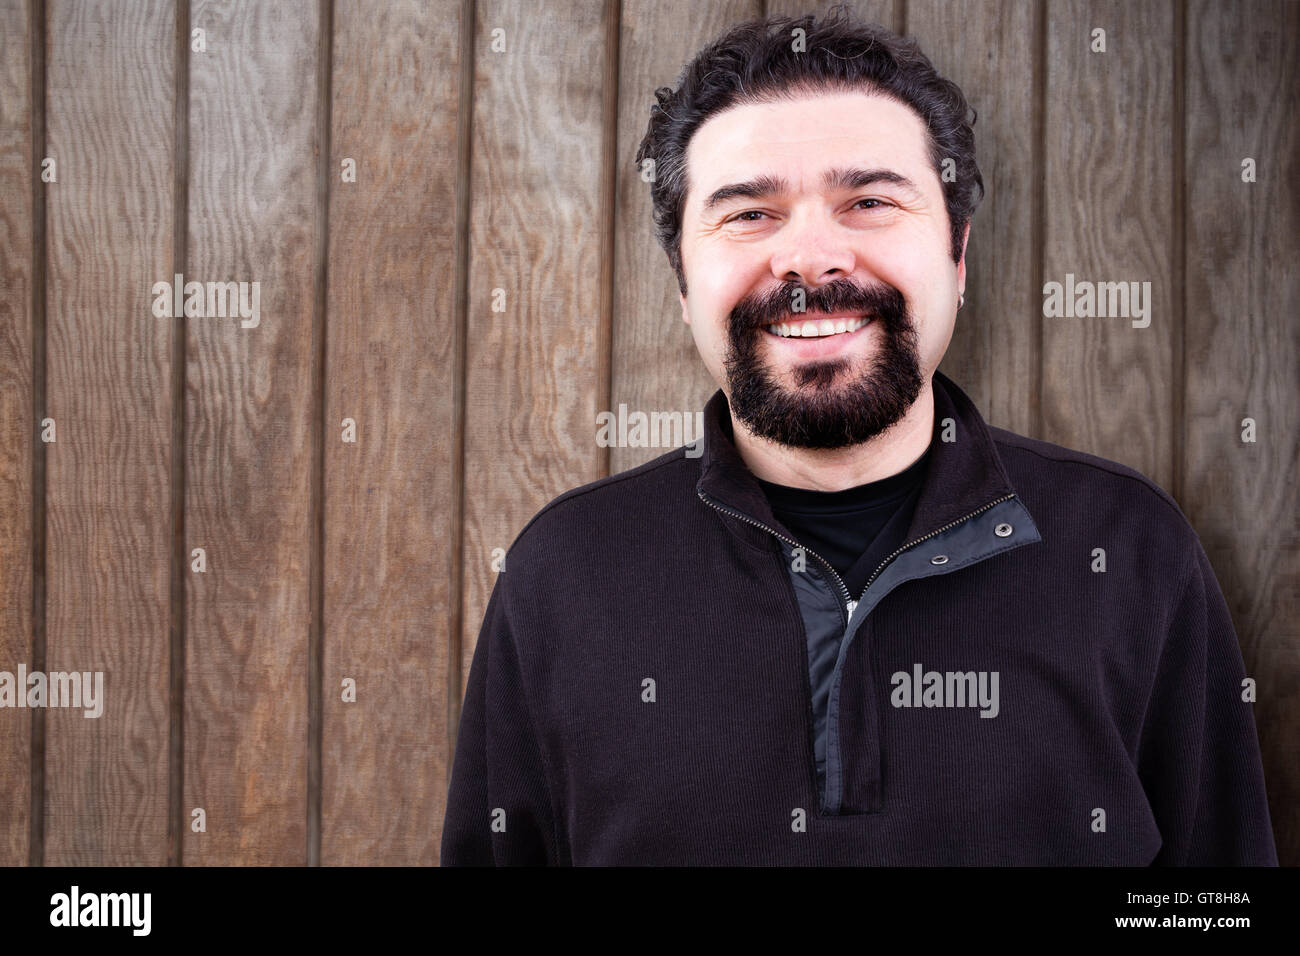 Half Body Shot of a Middle Aged Man with Goatee Beard, Sincerely Smiling at the Camera, Against Wooden Wall with Copy Space. Stock Photo